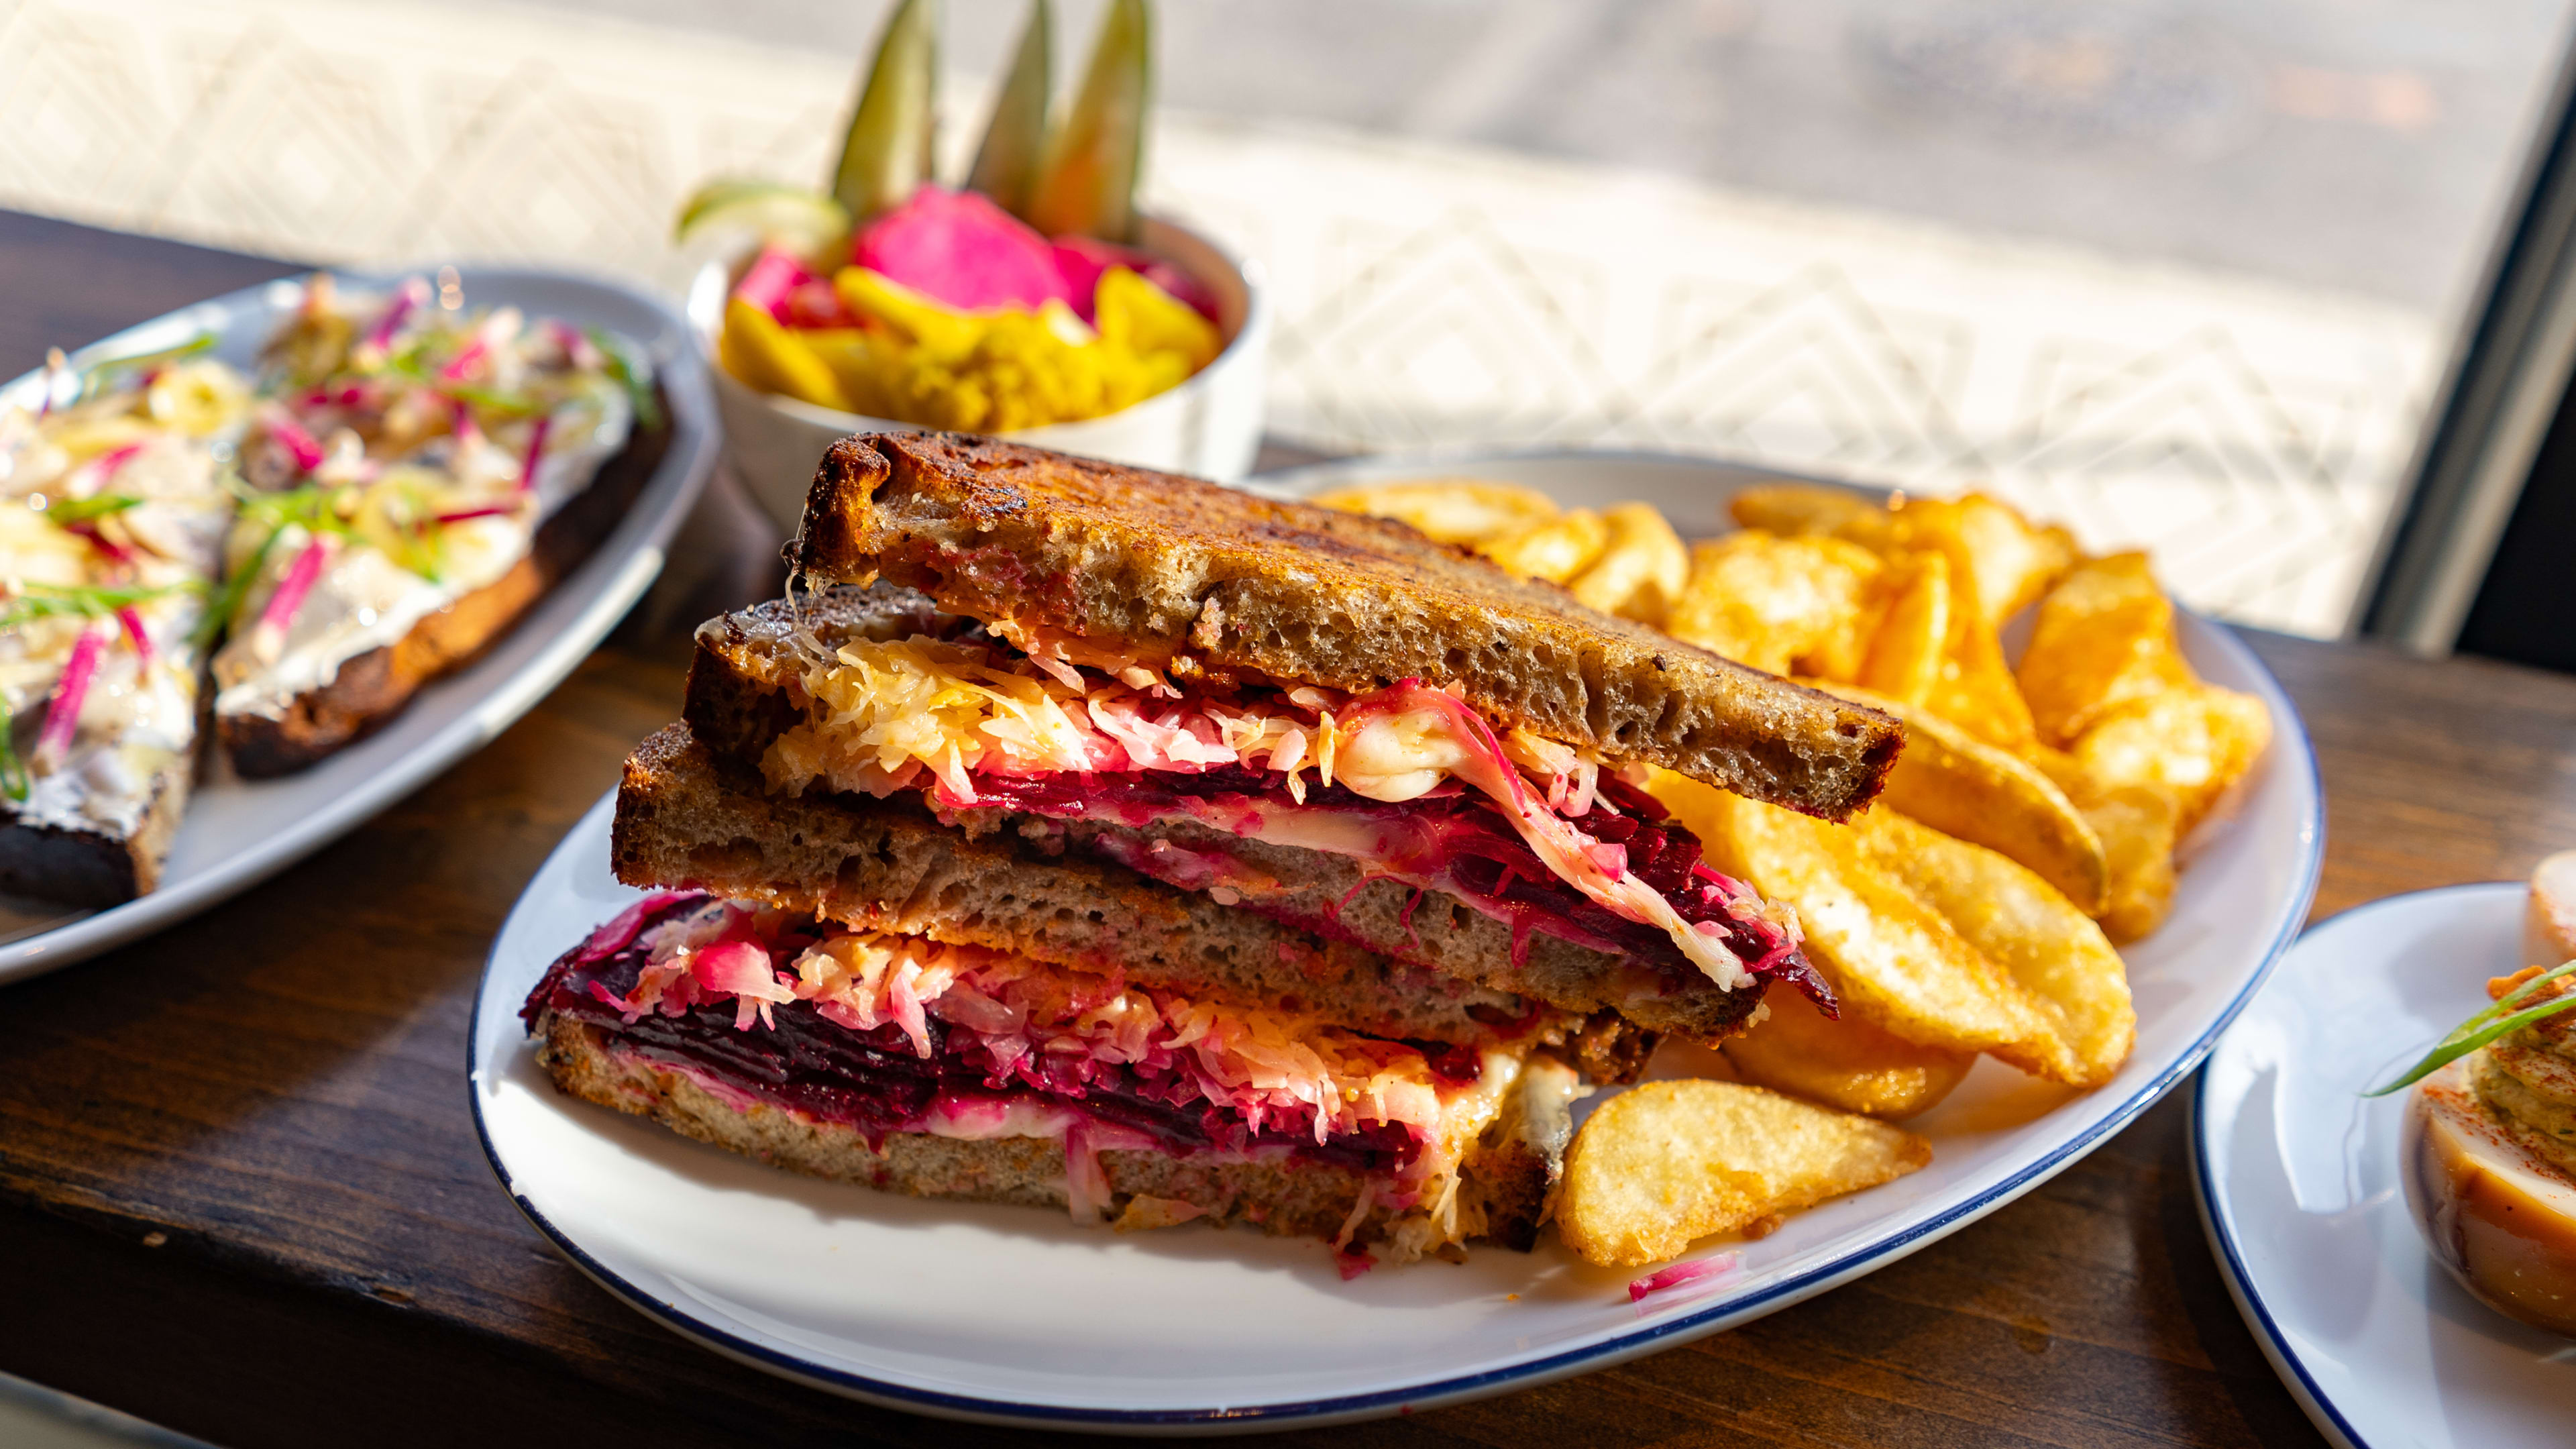 Beet pastrami sandwich on rye bread with side of potato chips at Lehrhaus